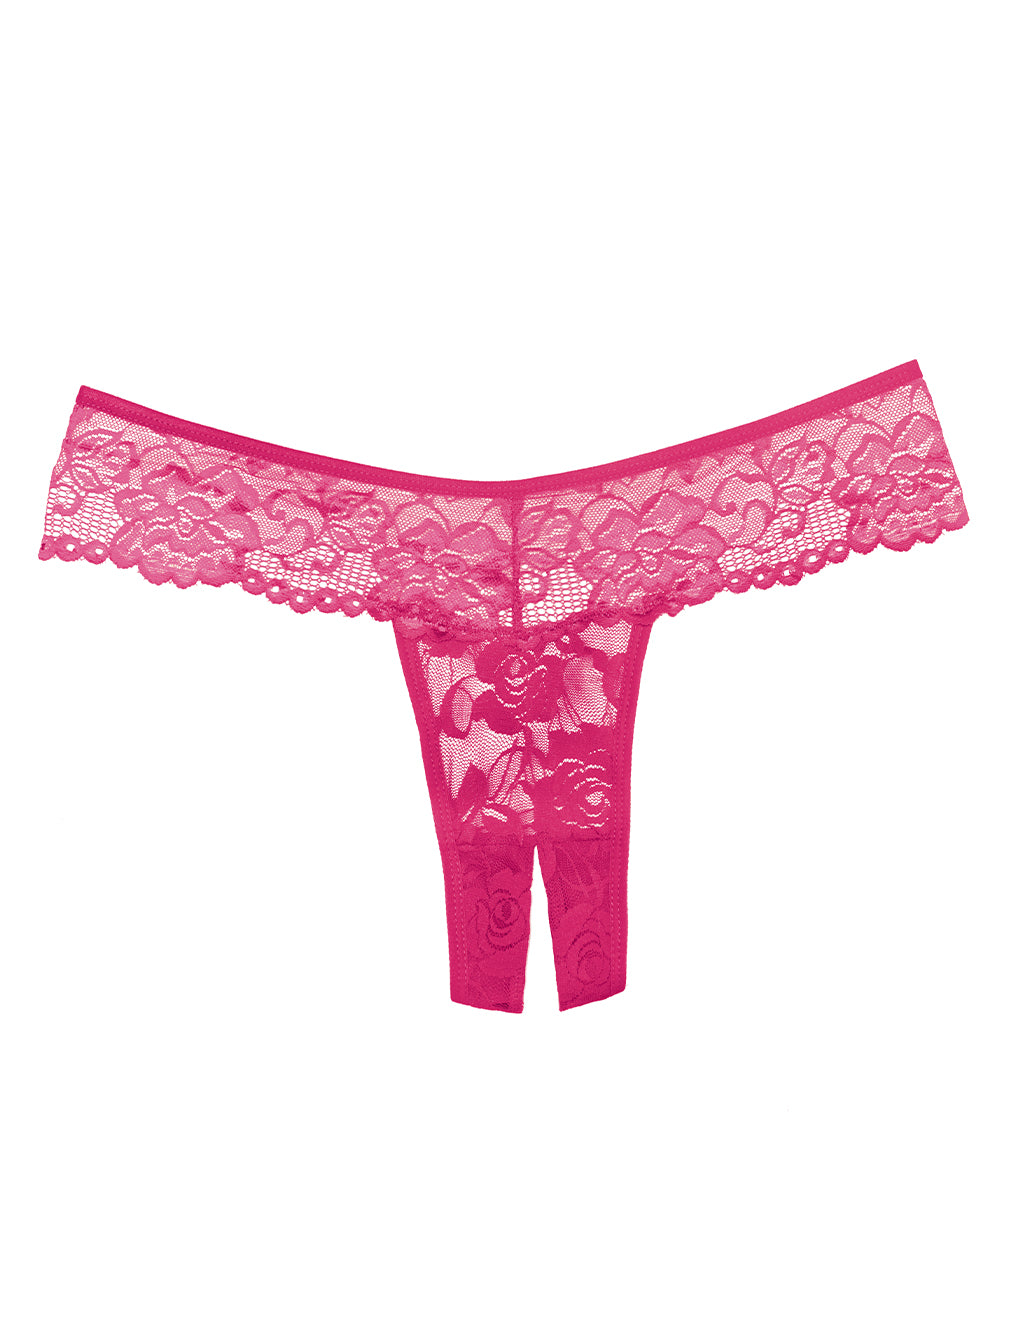 Allure Lingerie Crotchless Lace Thong- Hot Pink- Front